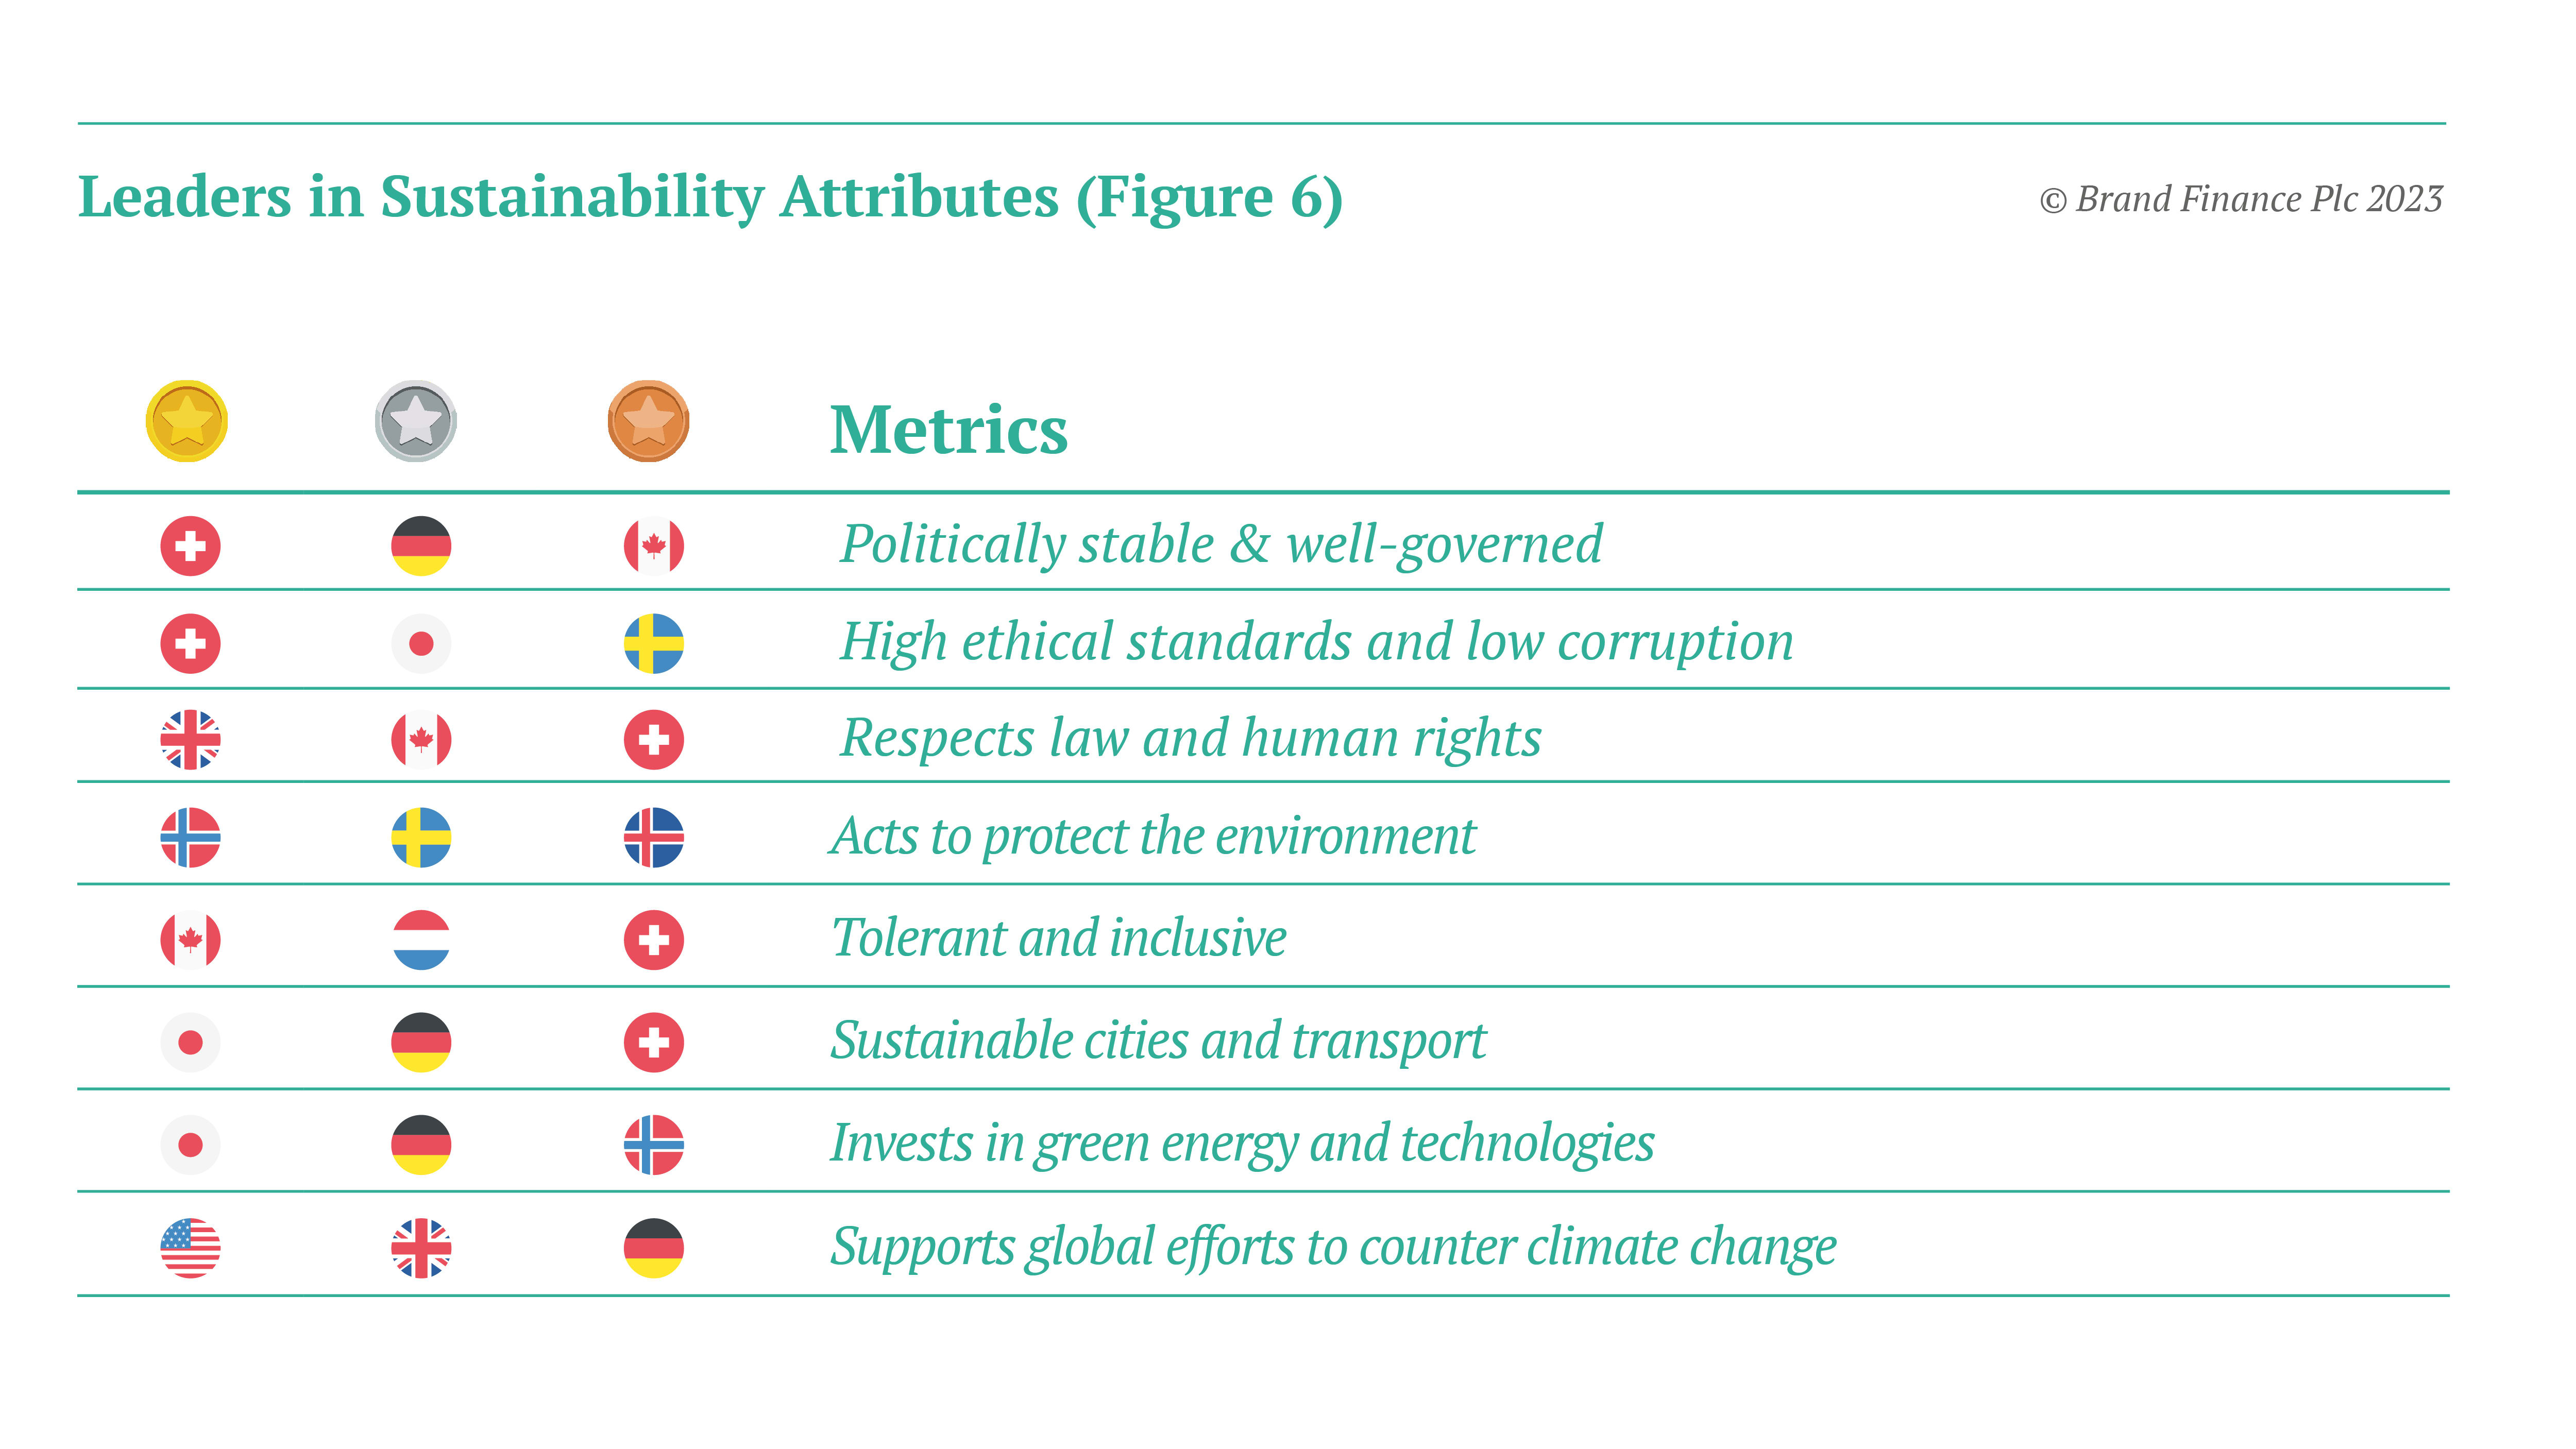 Table showing which countries are leading across different sustainability attributes in the Global Soft Power Index.